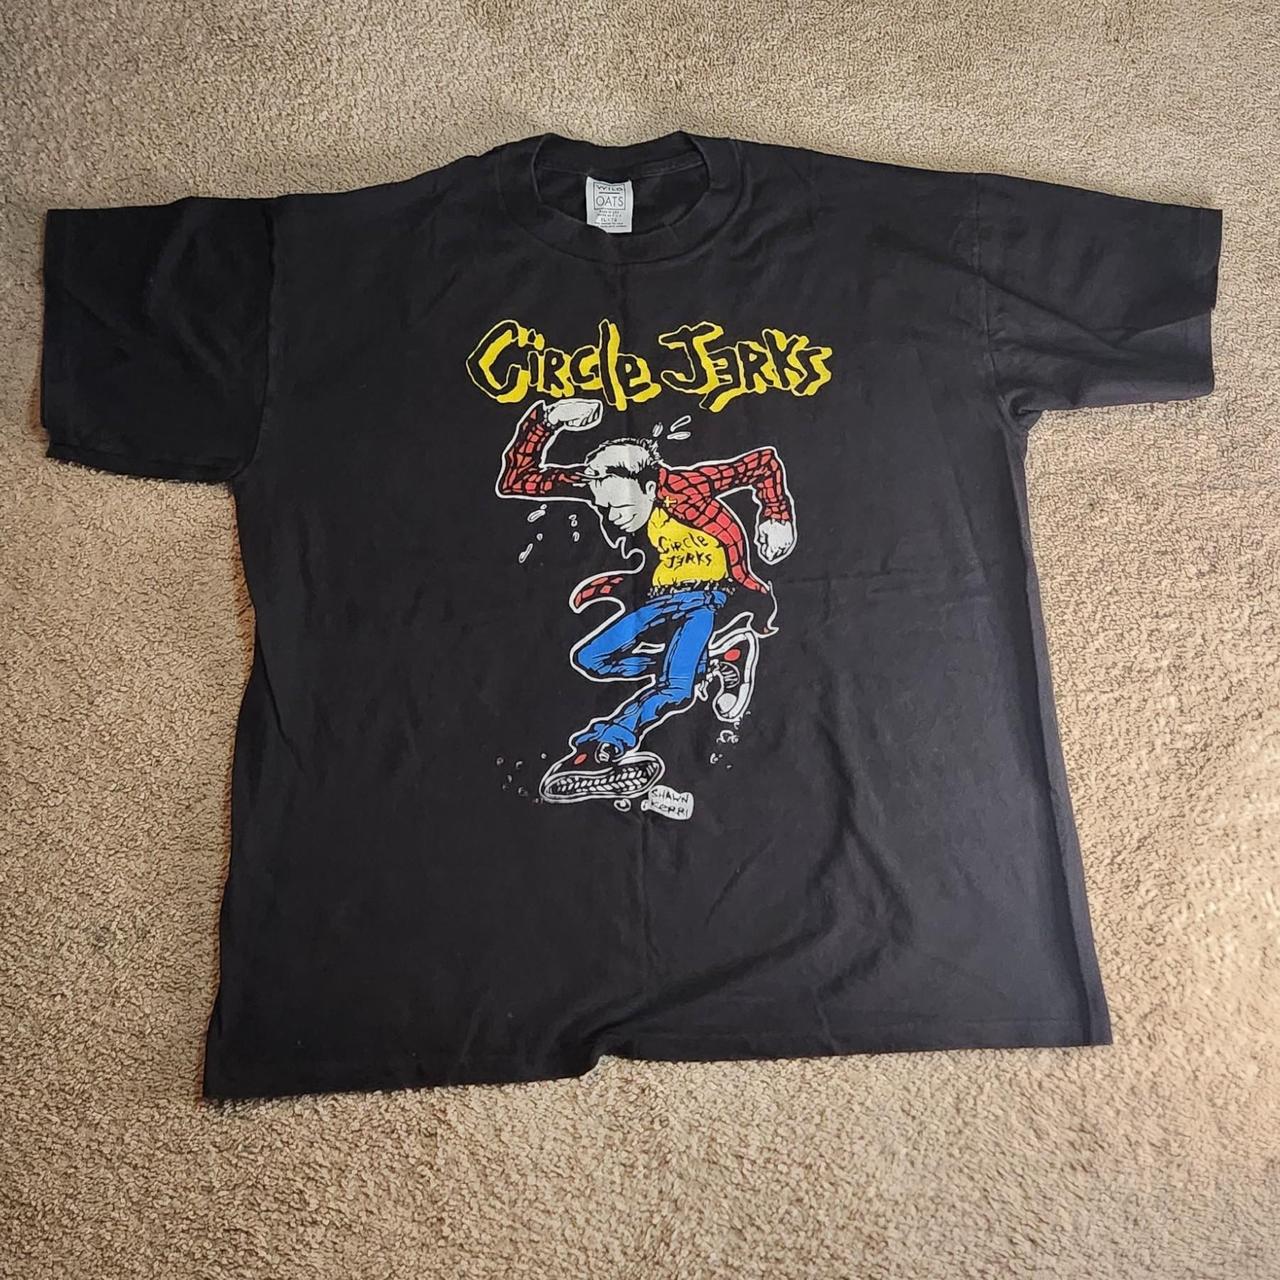 1995 circle jerks shirt size xl. All flaws in... - Depop